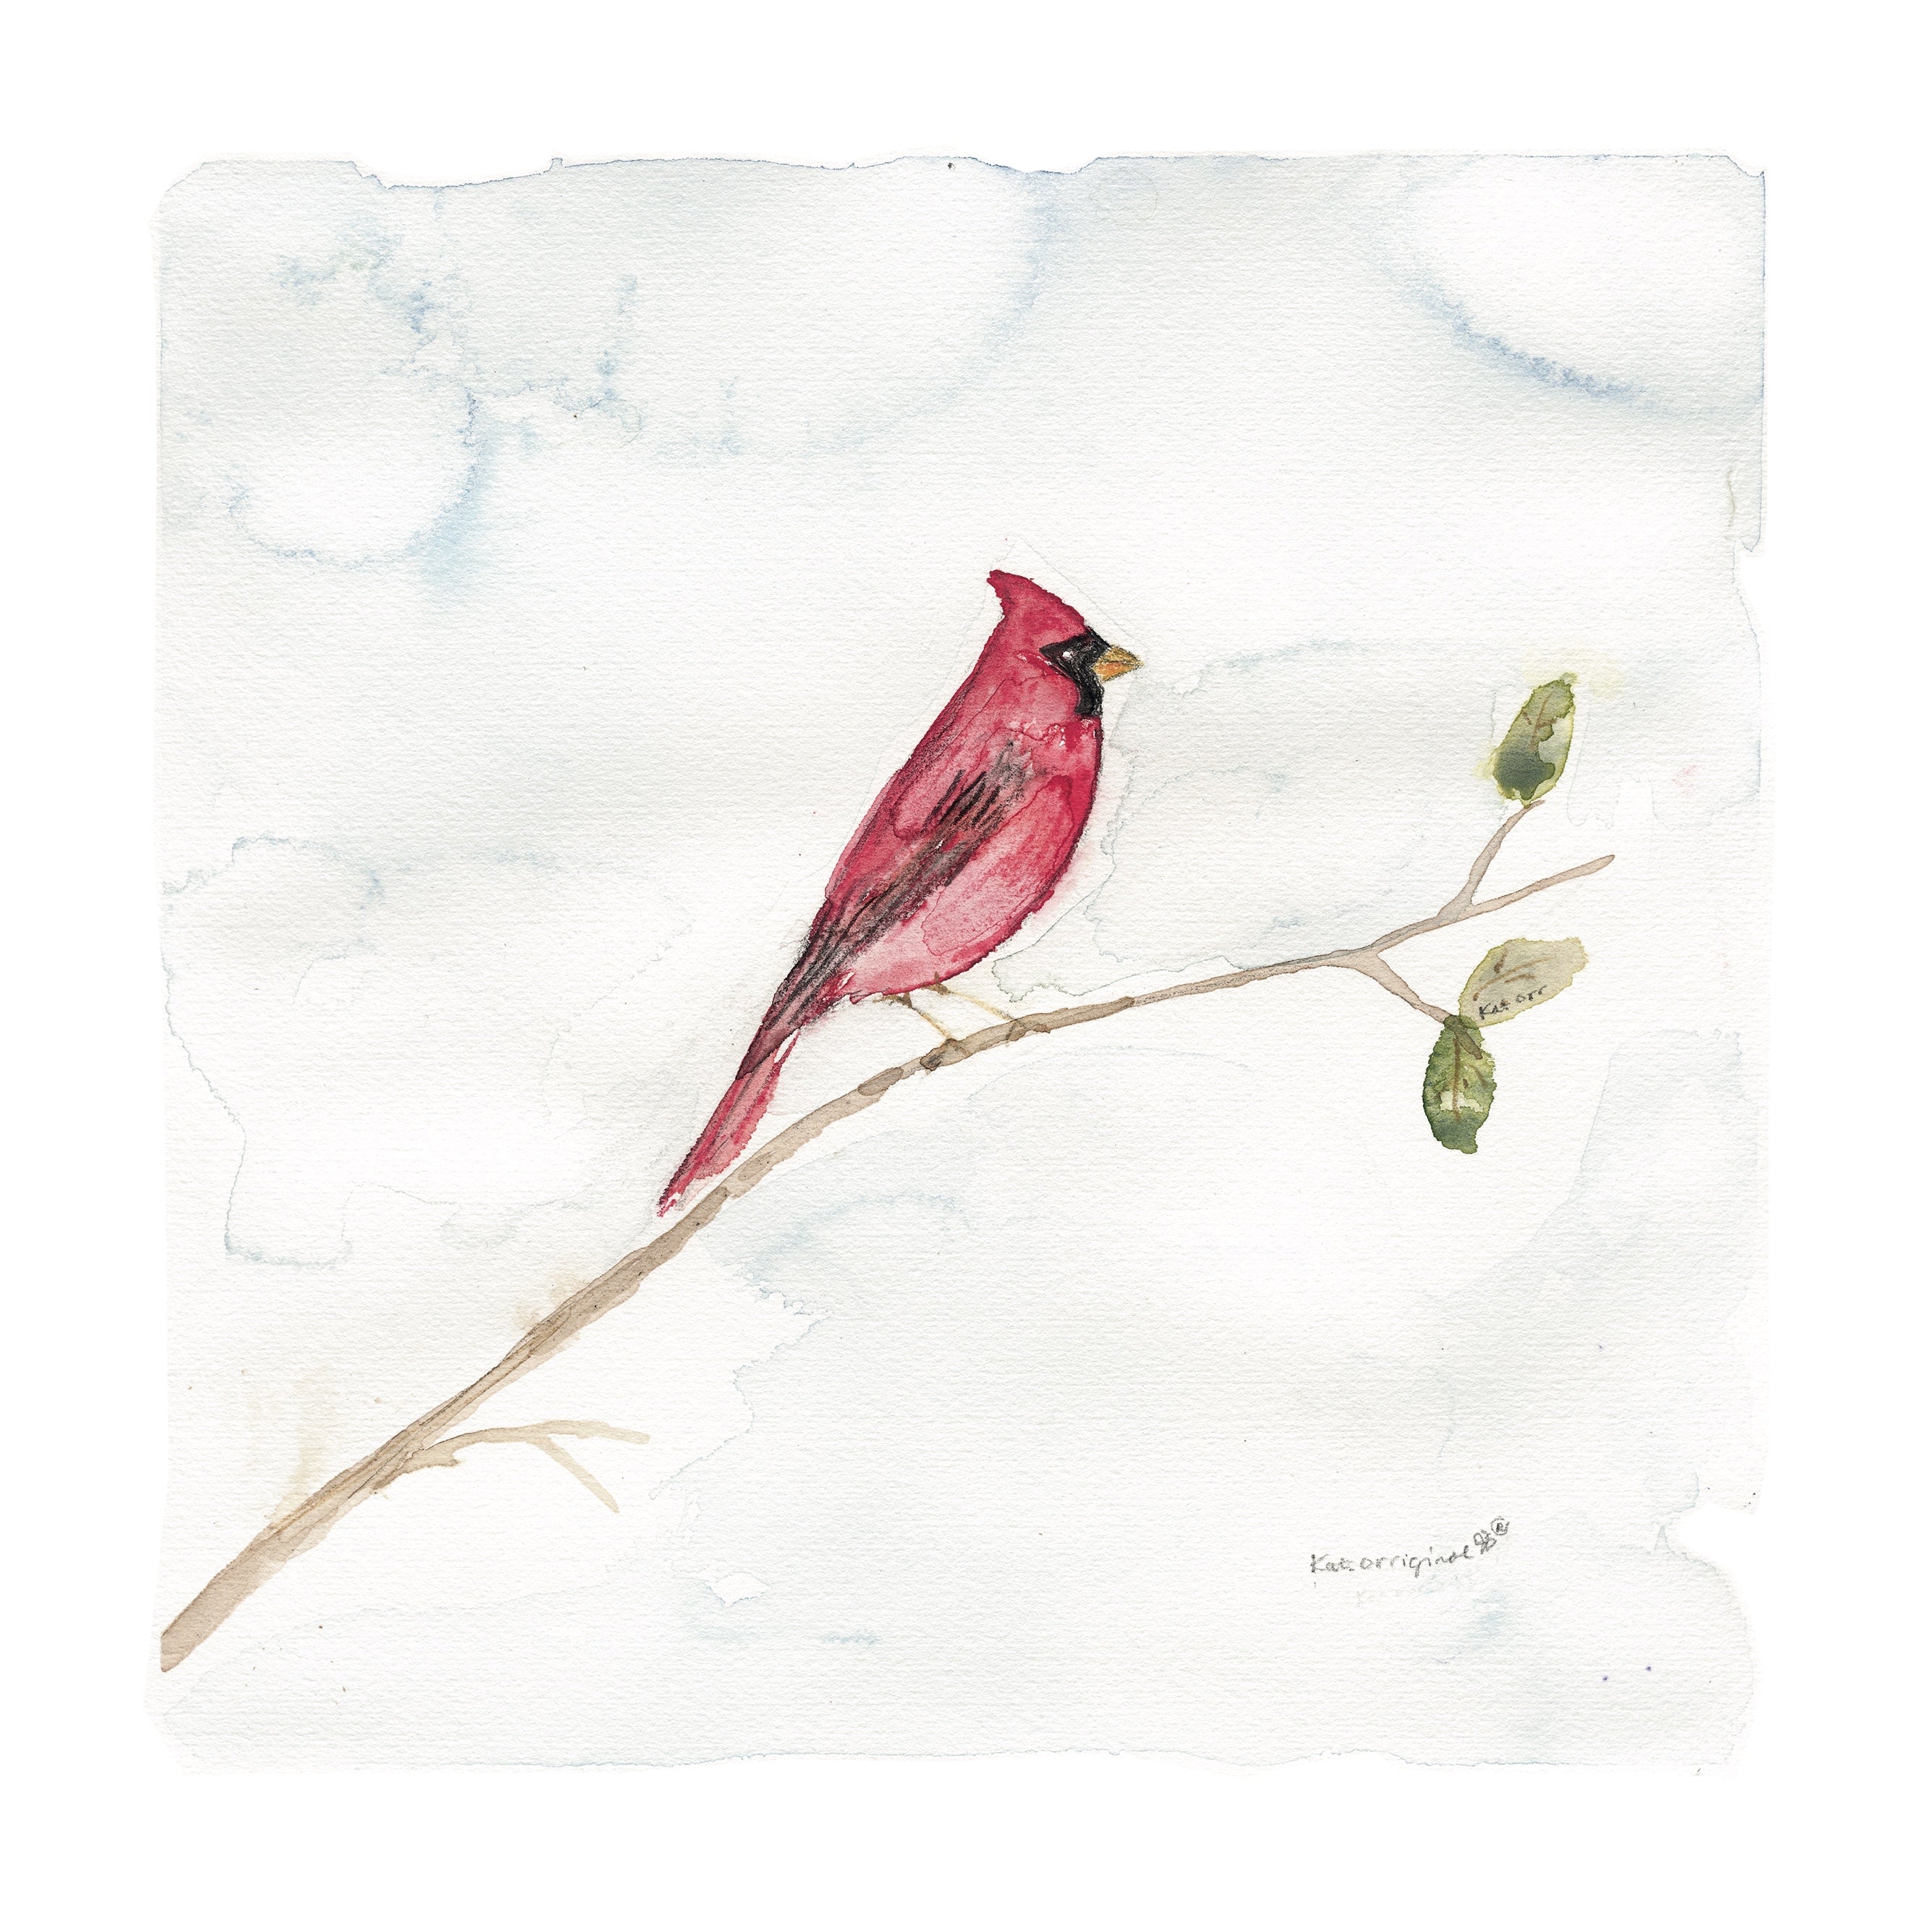 Mr. Cardinal watercolor painting reproduced on stationery